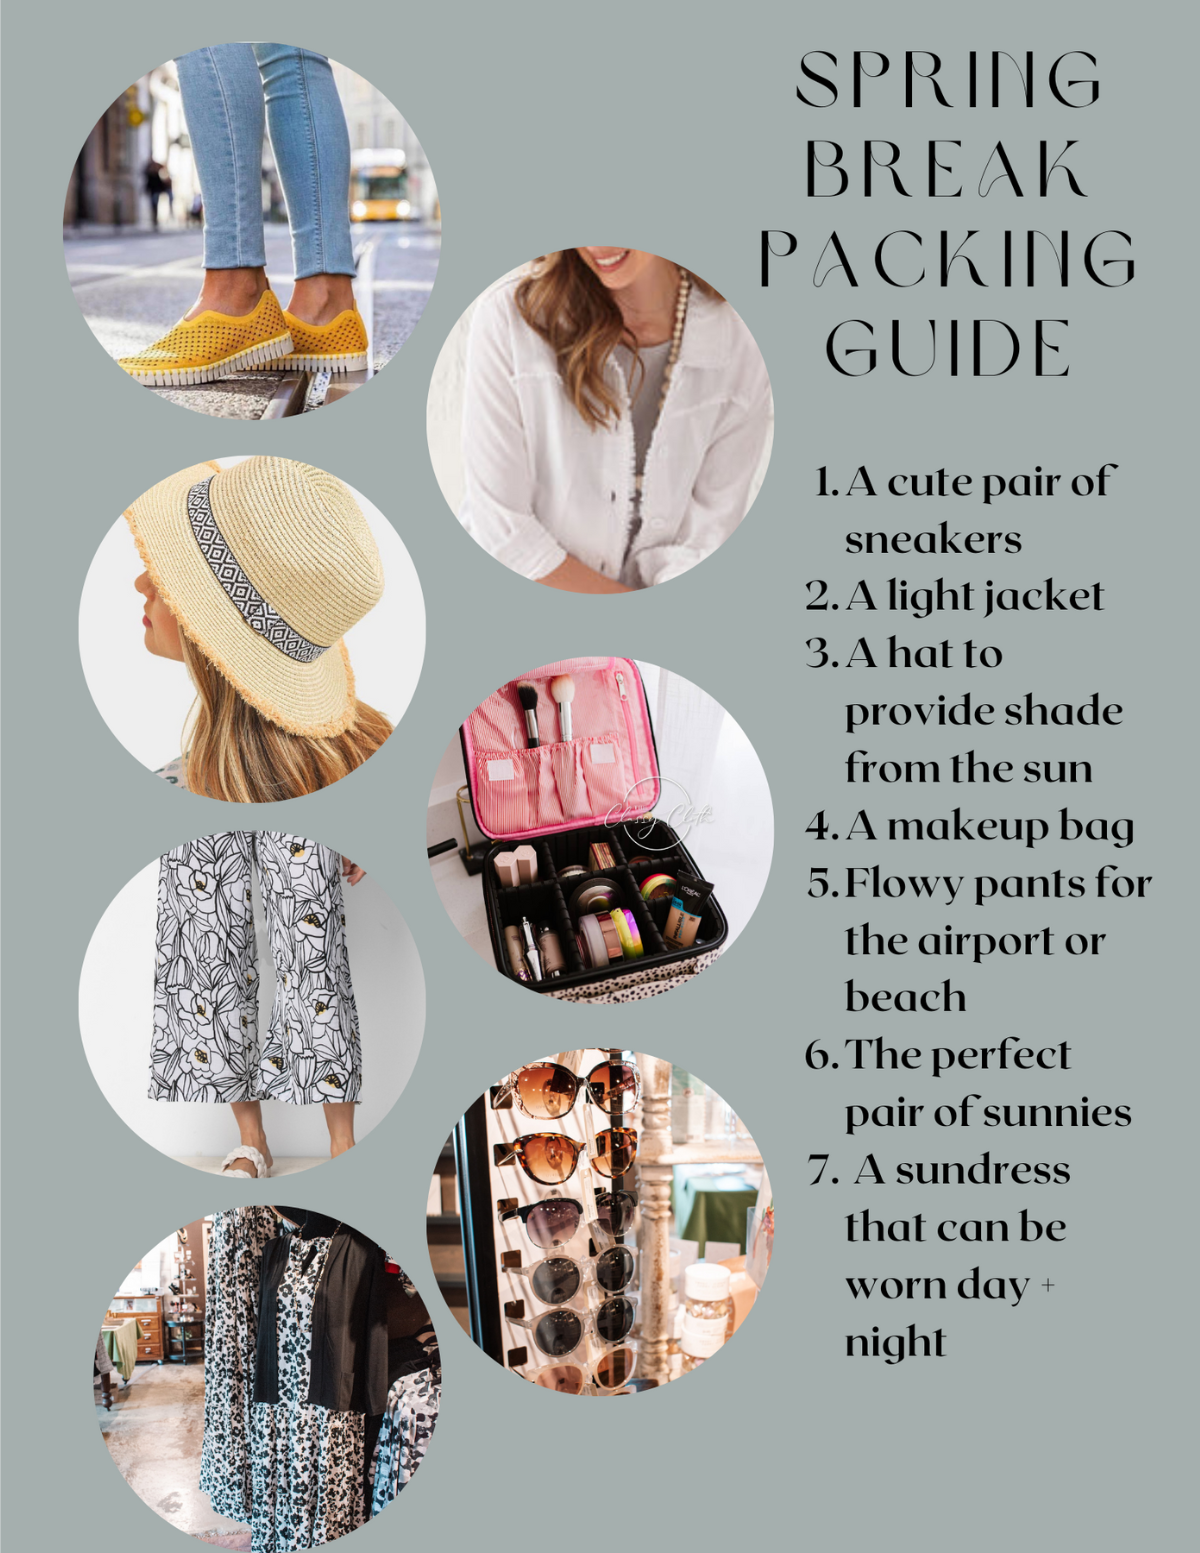 Packing Guide